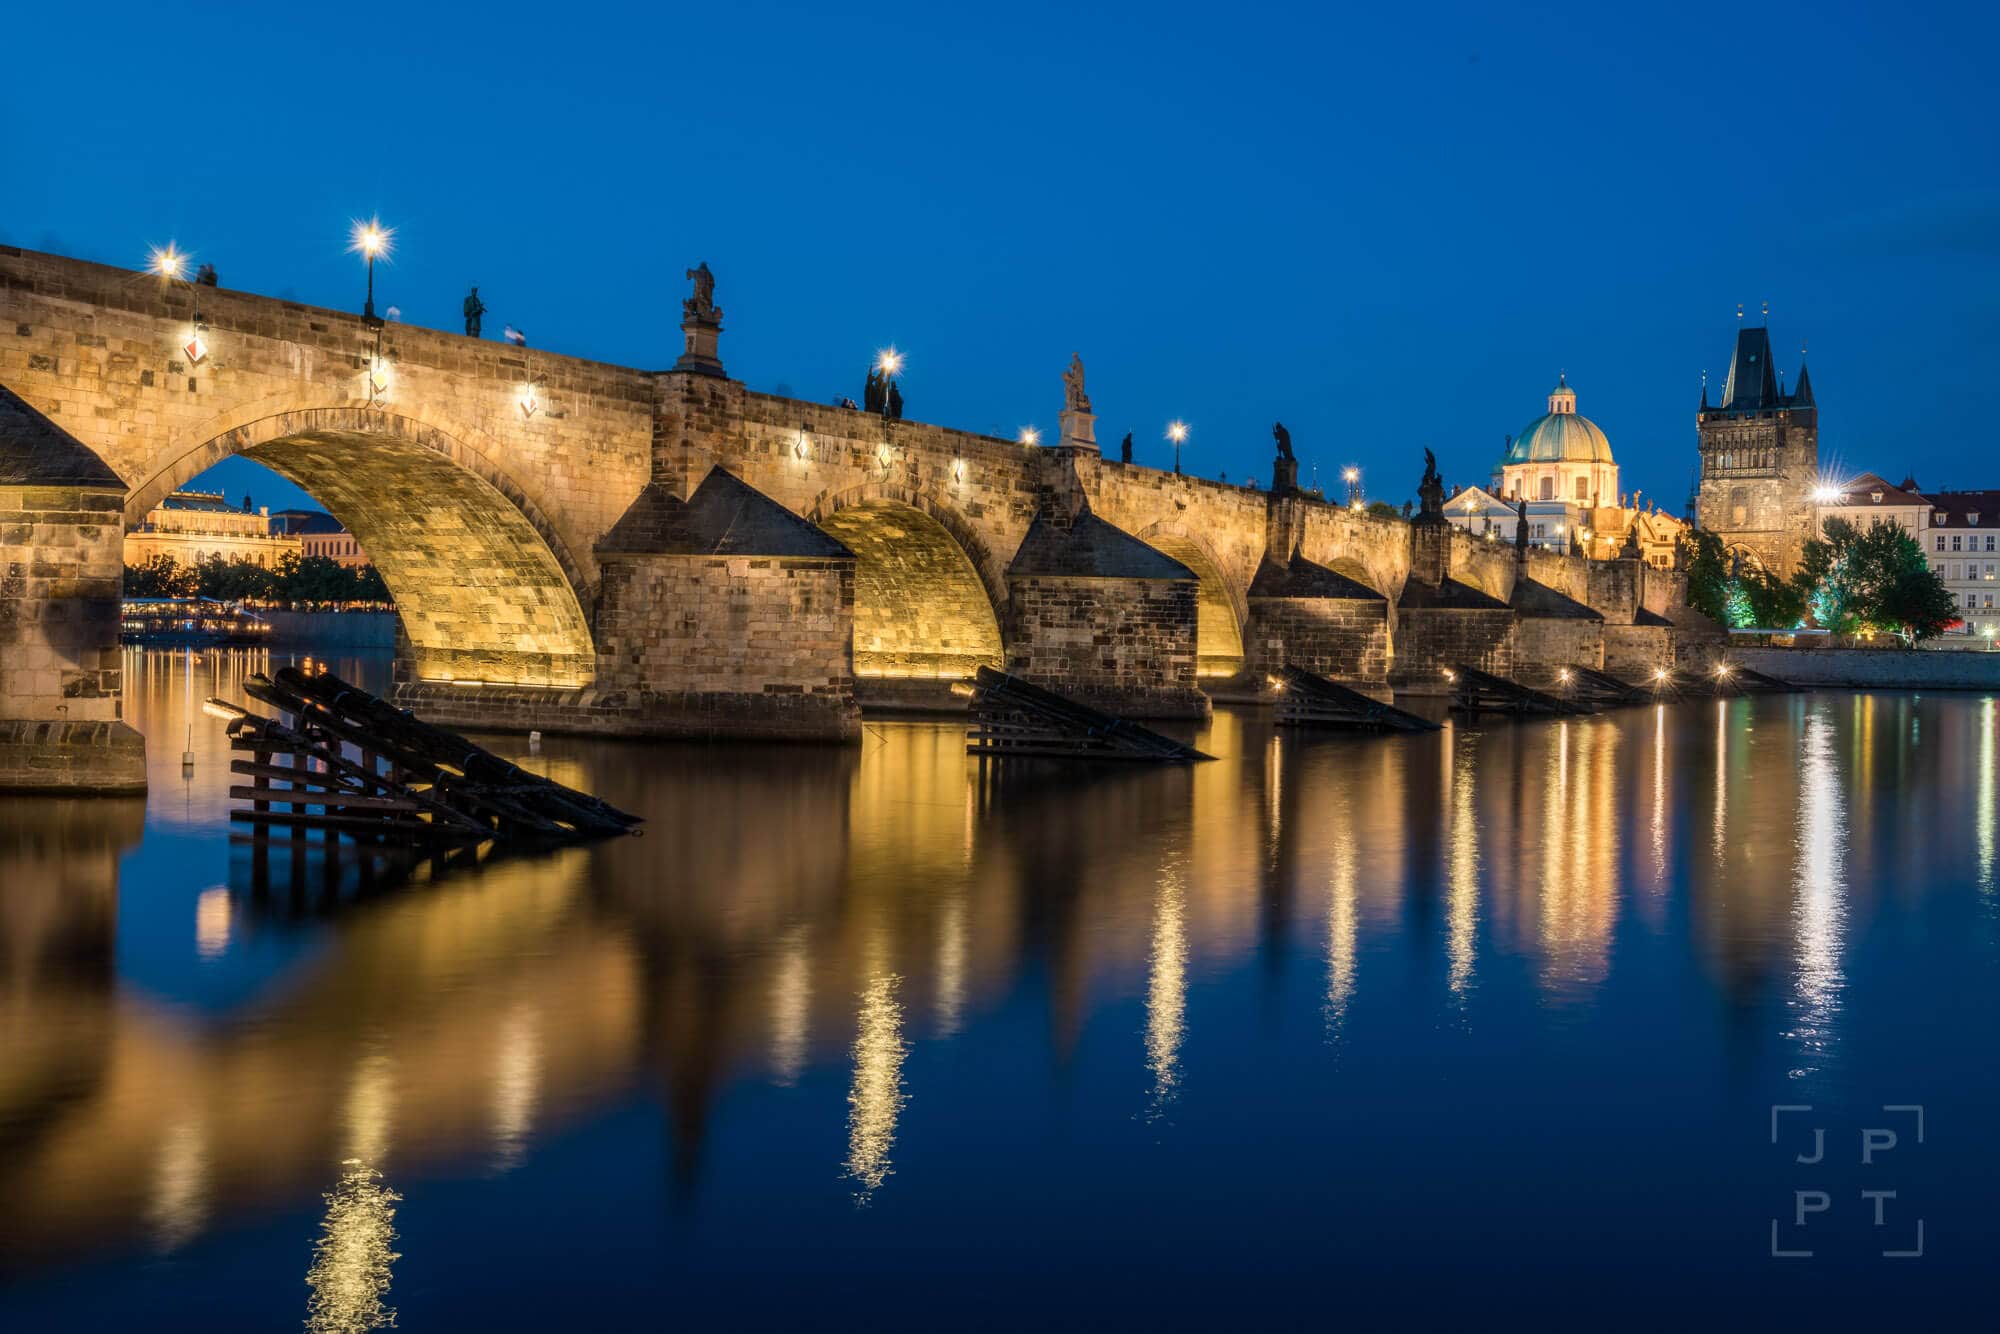 The grand finale of the night tour is the illuminated Charles Bridge, Prague